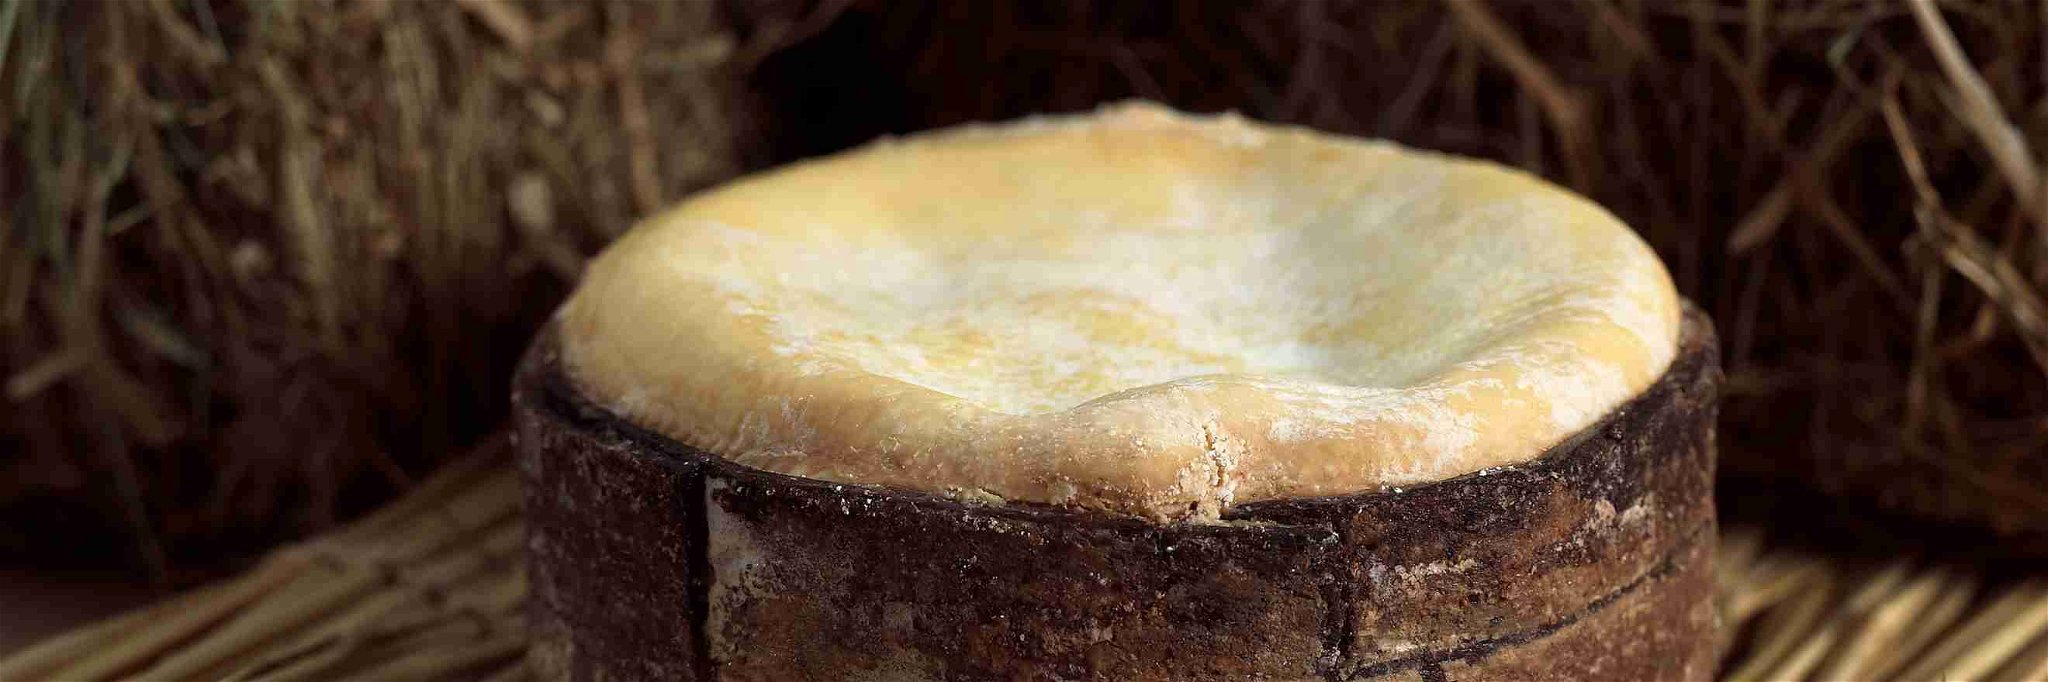 A Vacherin cheese with its spruce band